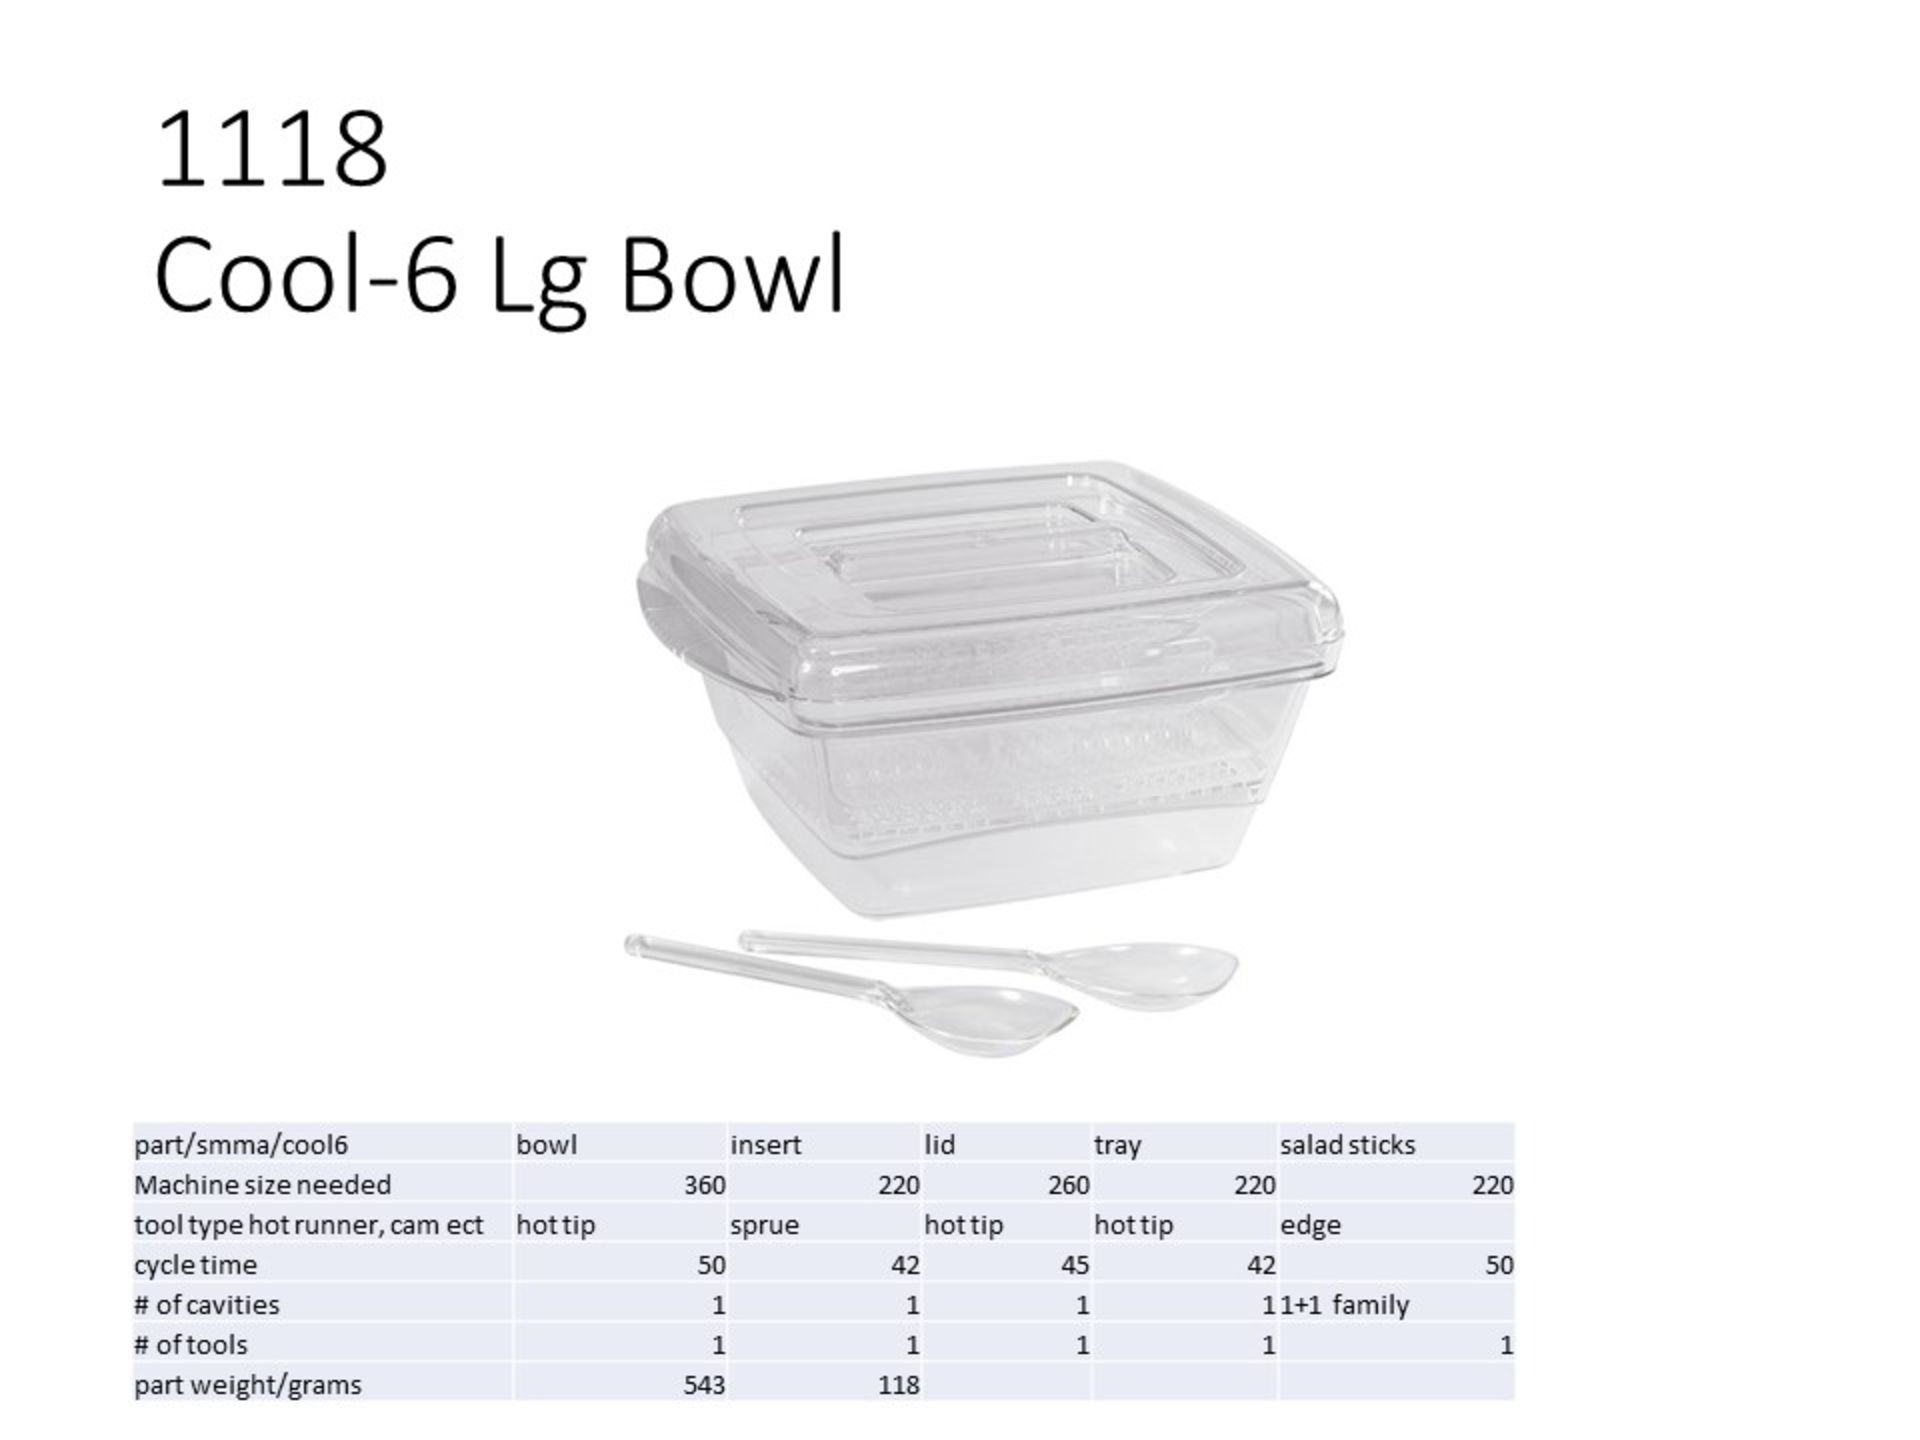 PLASTIC INJECTION MOLD - Cool 6 Lg Bowl